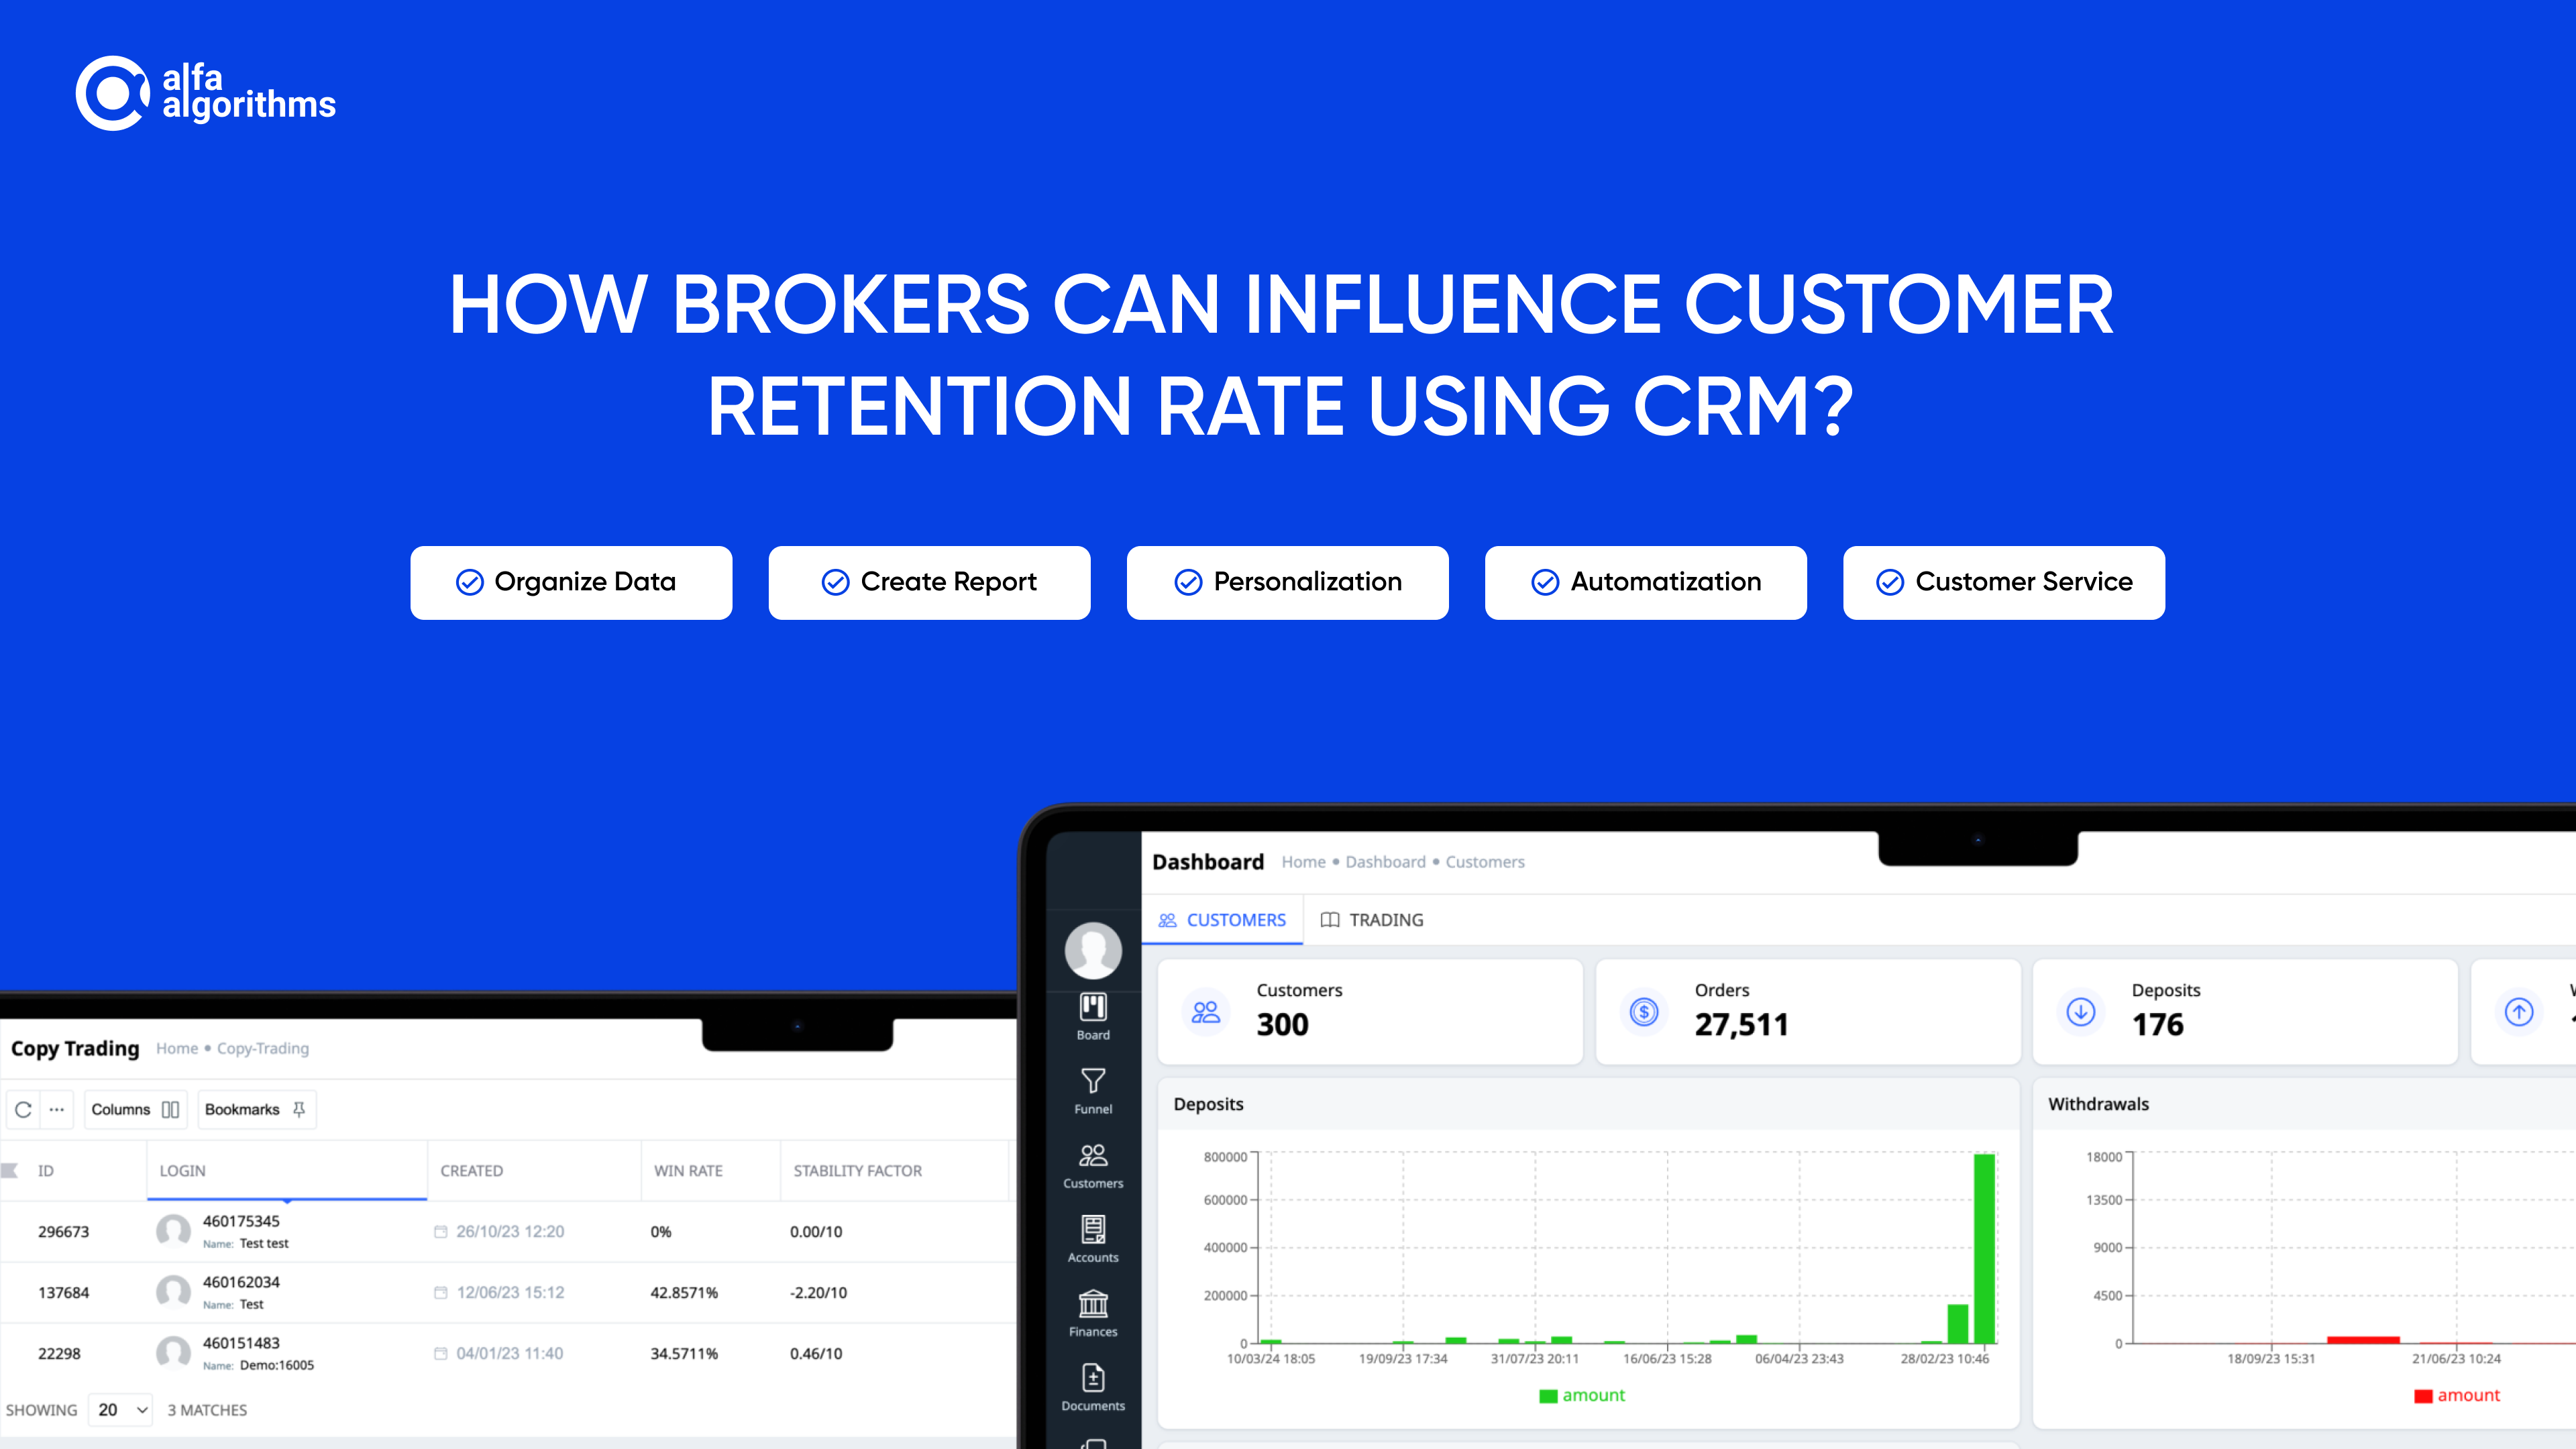 How brokers can influence customer retention rate using CRM?